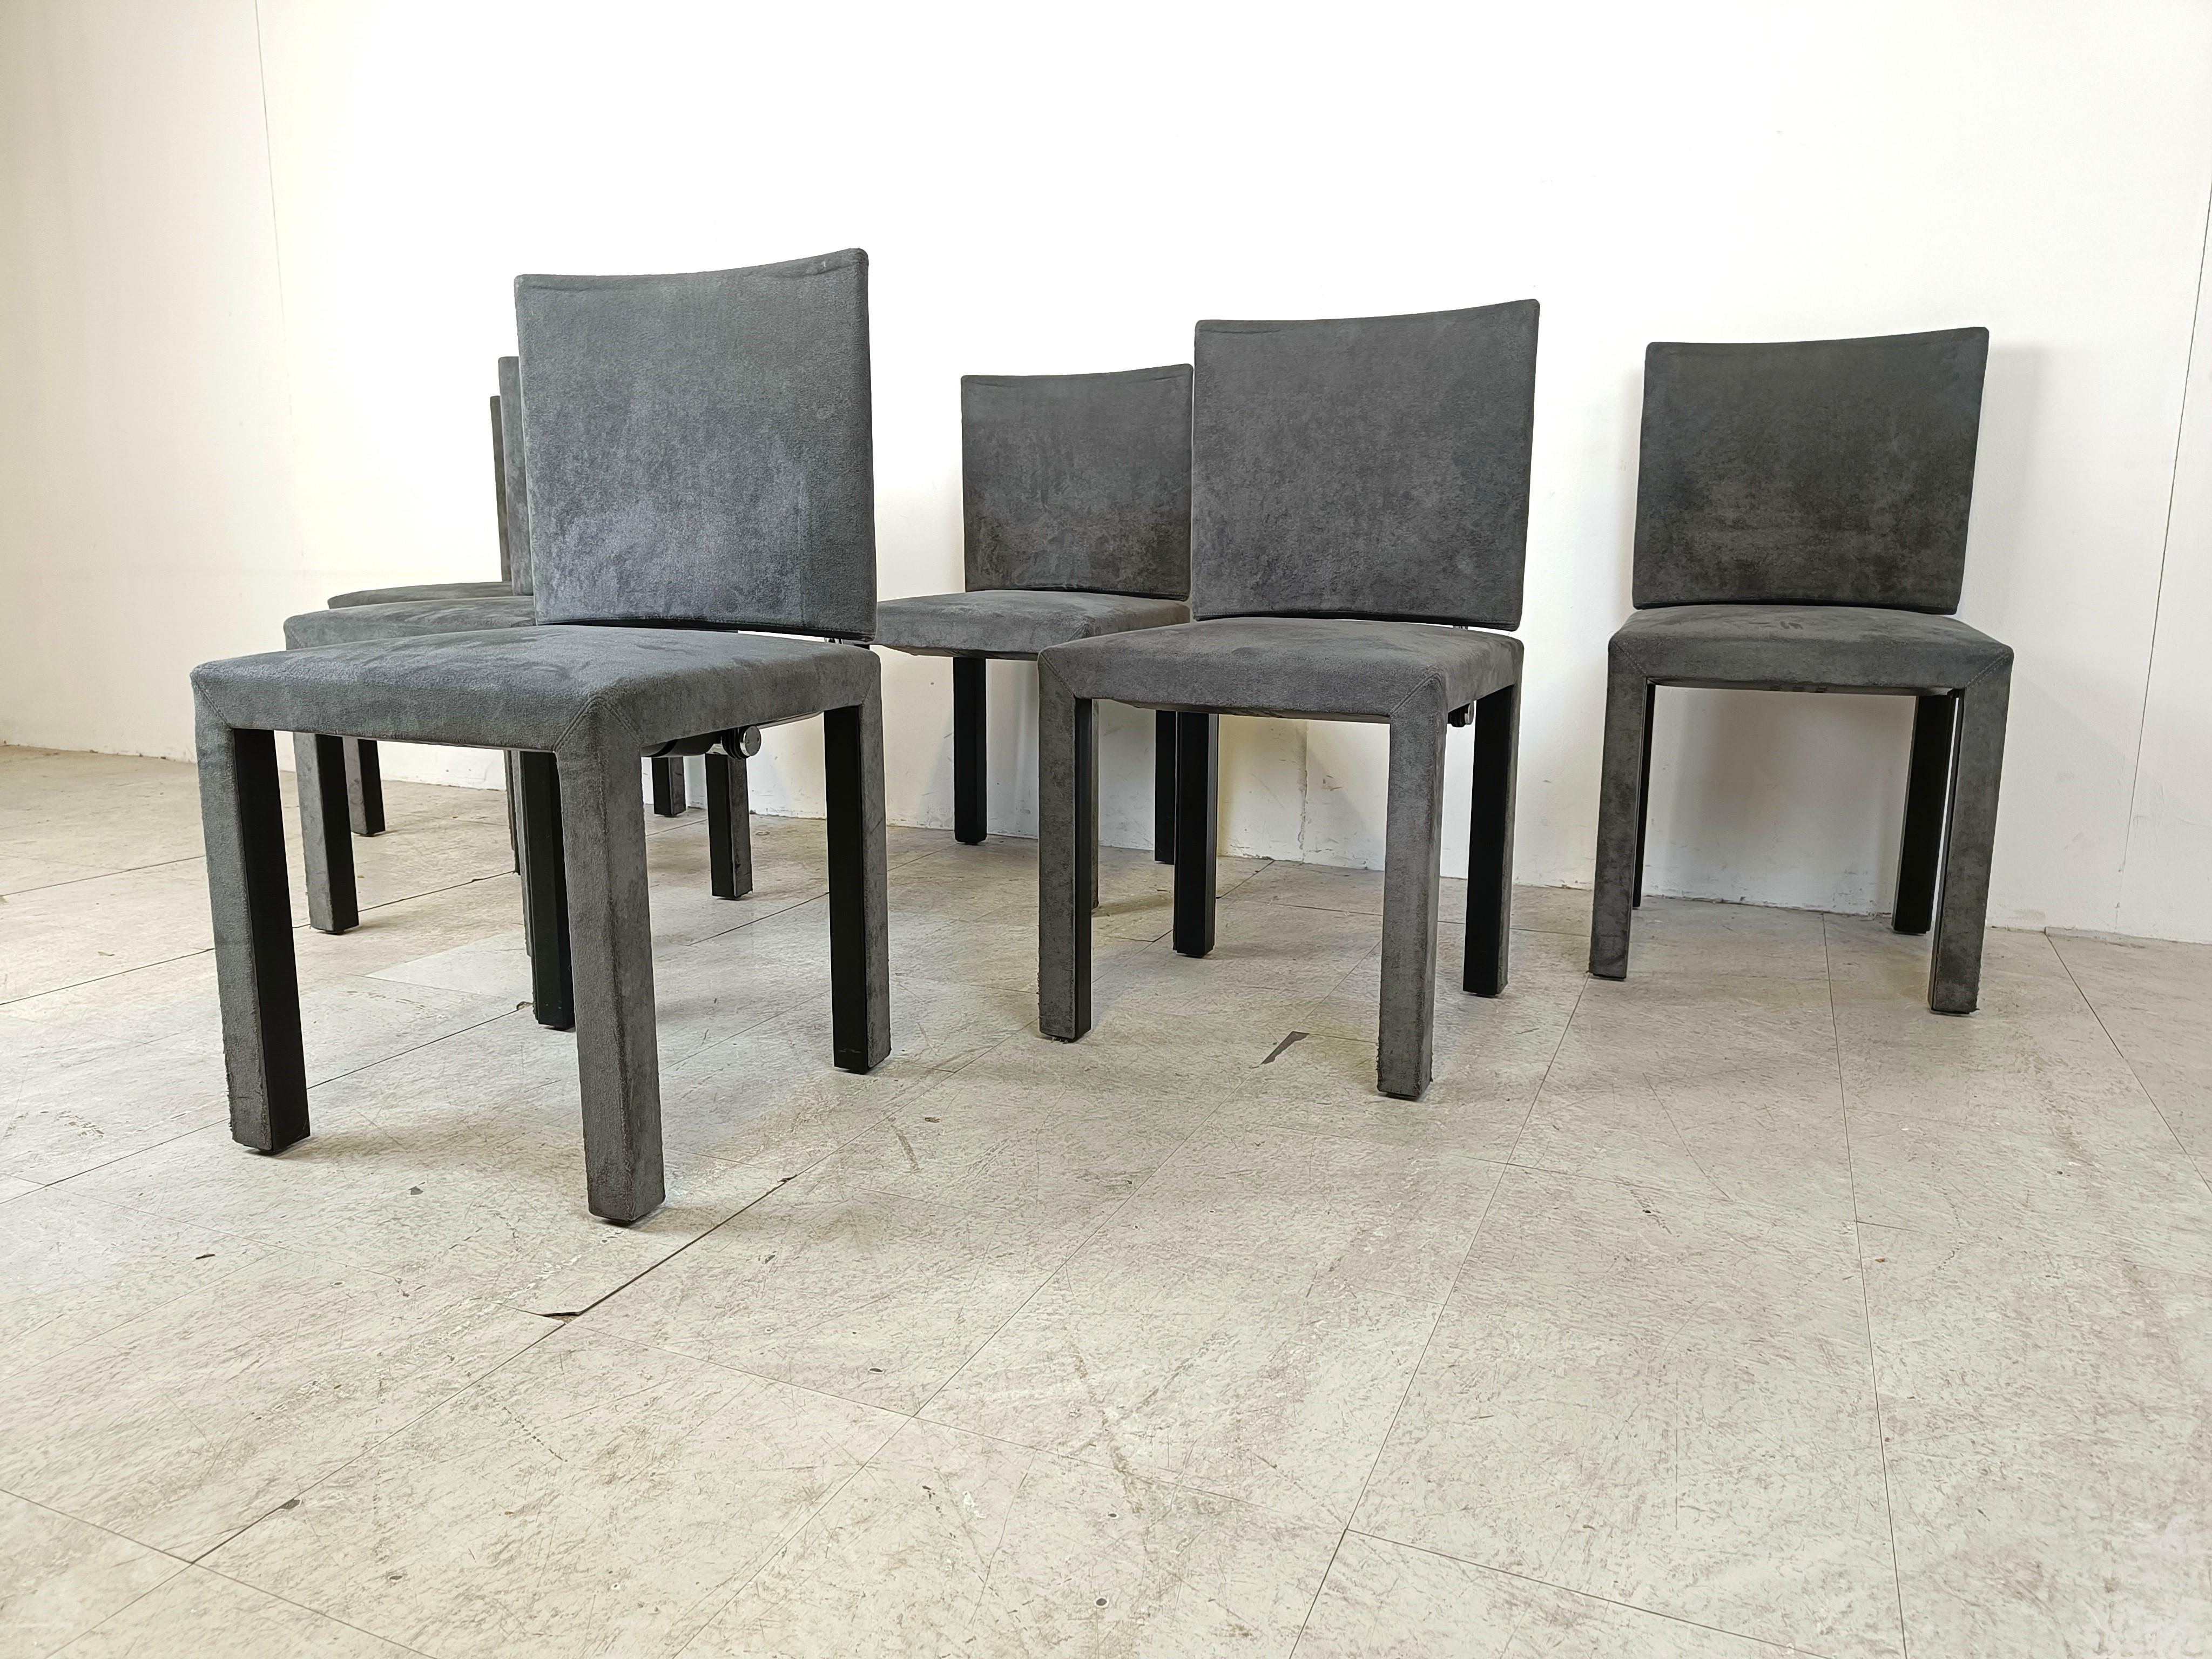 Late 20th Century Arcadia dining chairs by Paolo Piva for B& B Italia set of 6